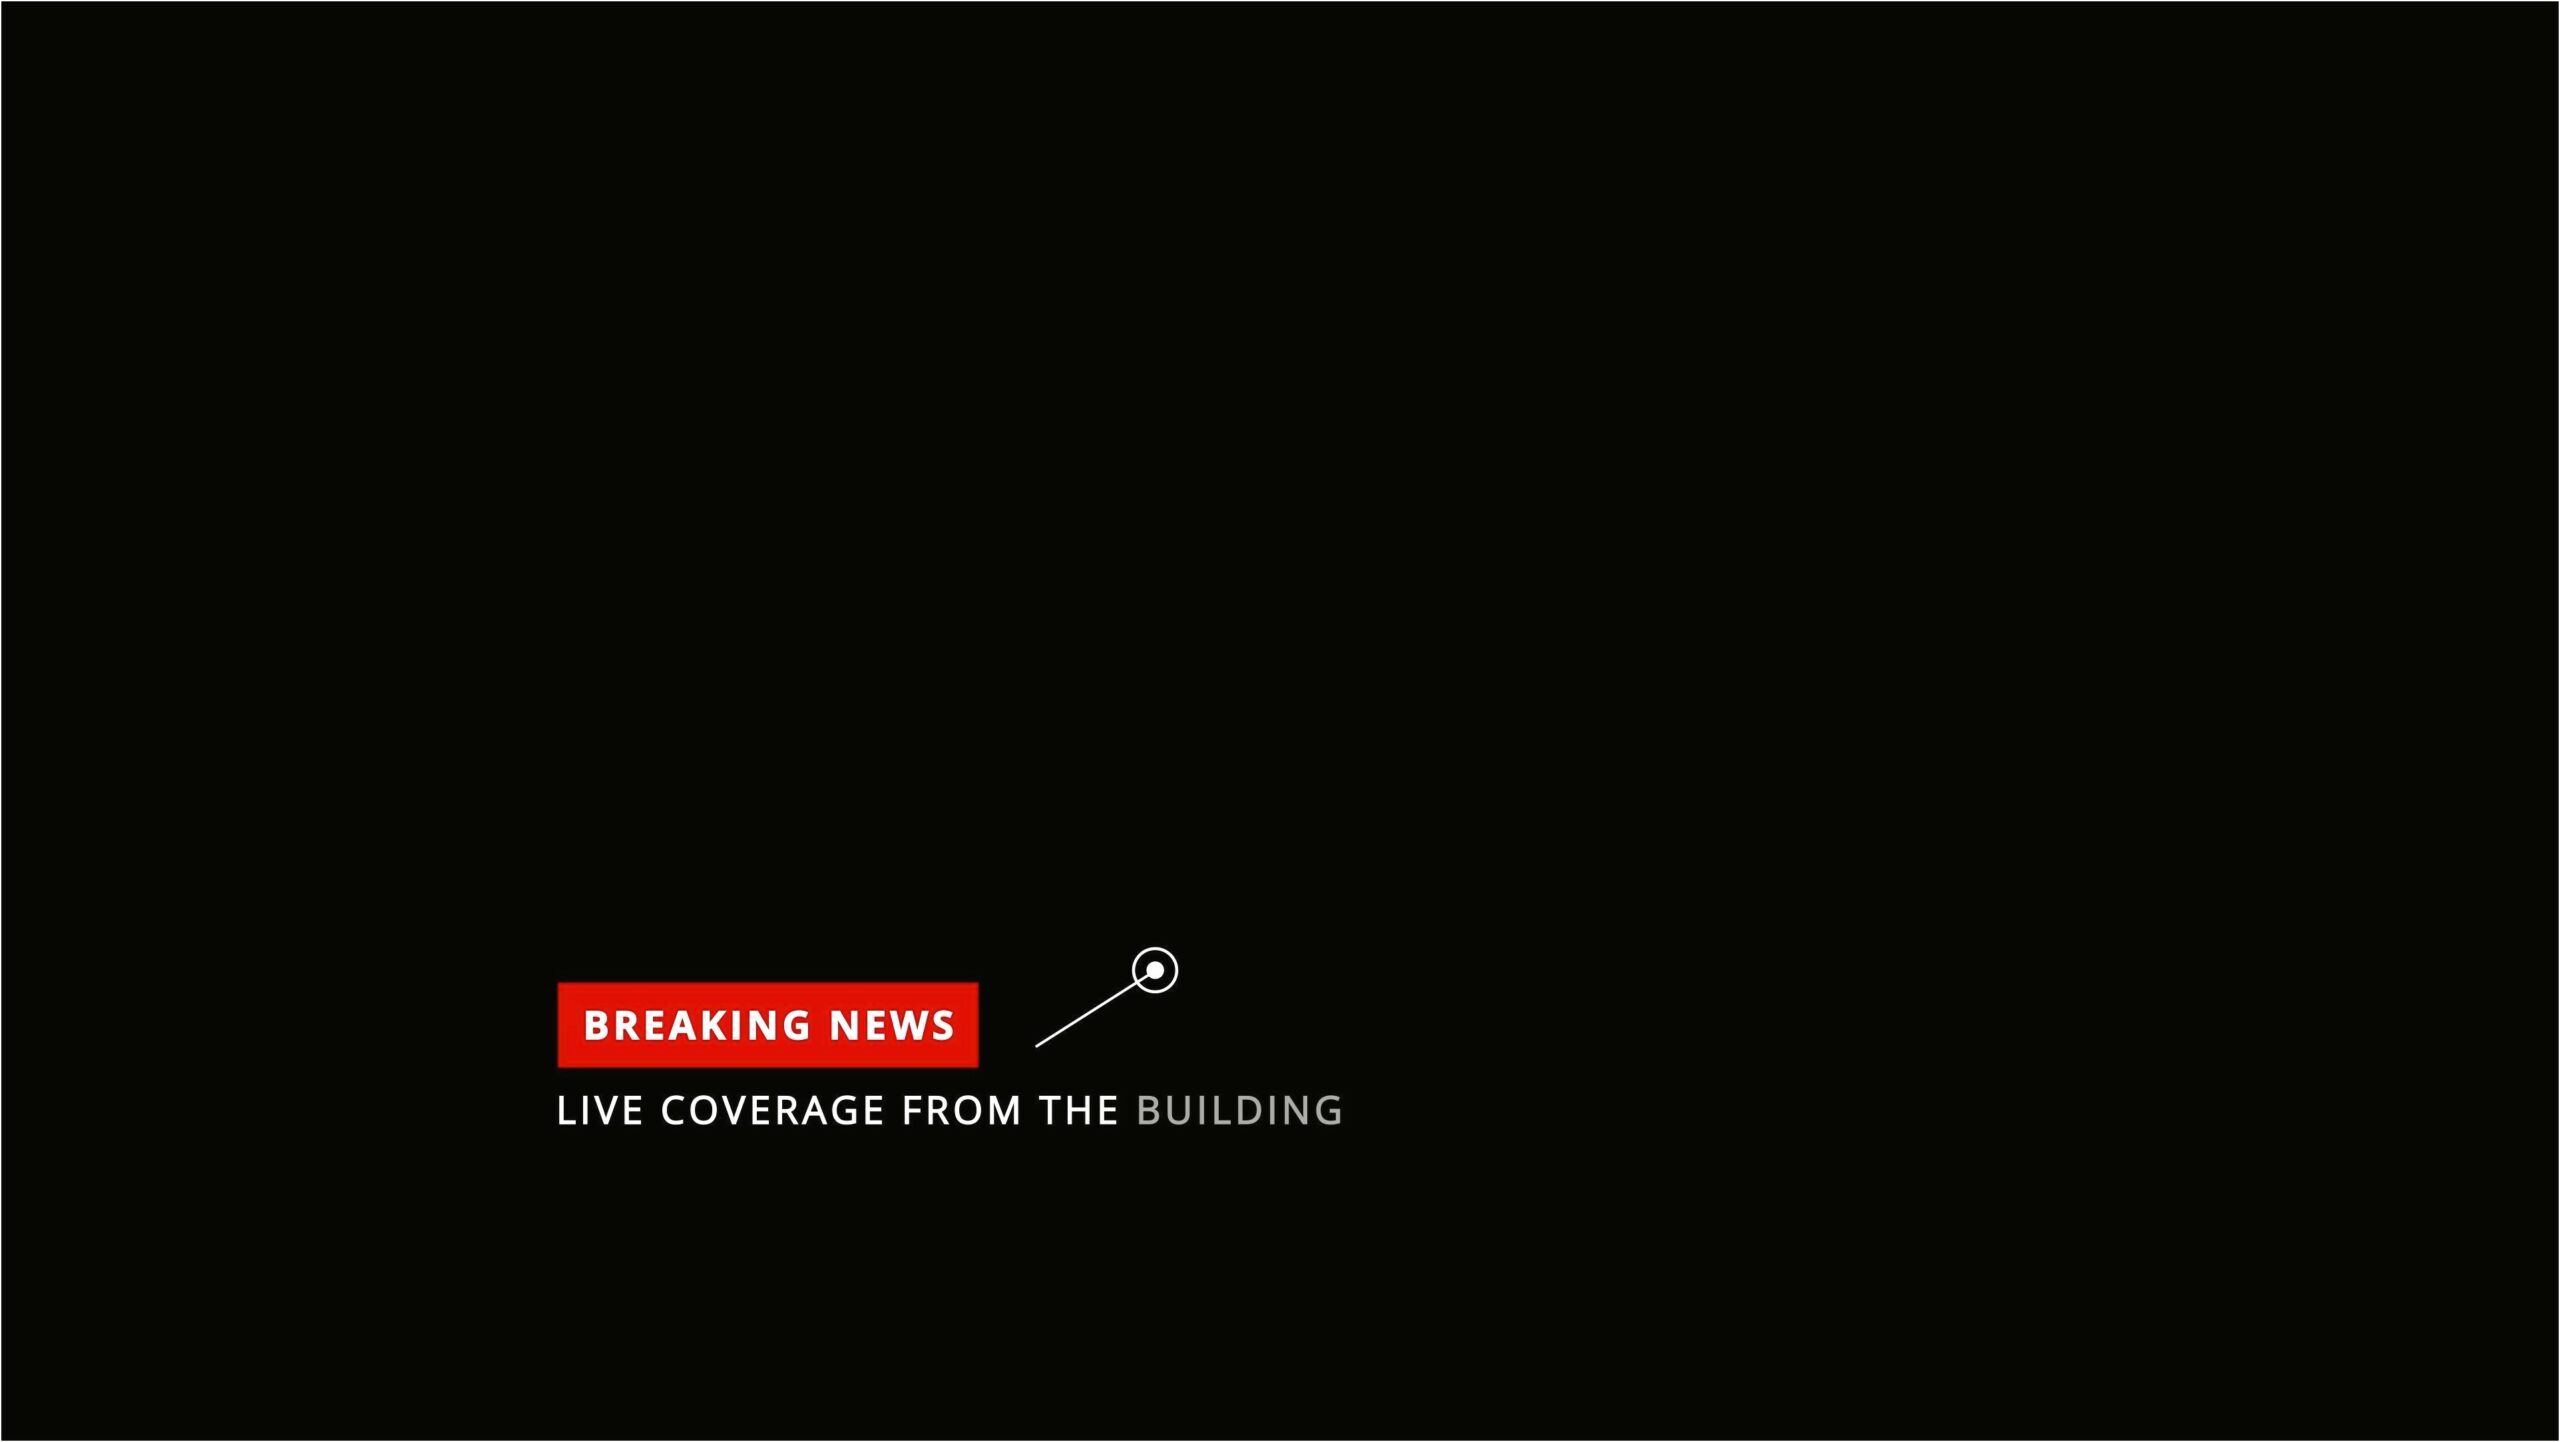 Breaking News After Effects Template Free Download